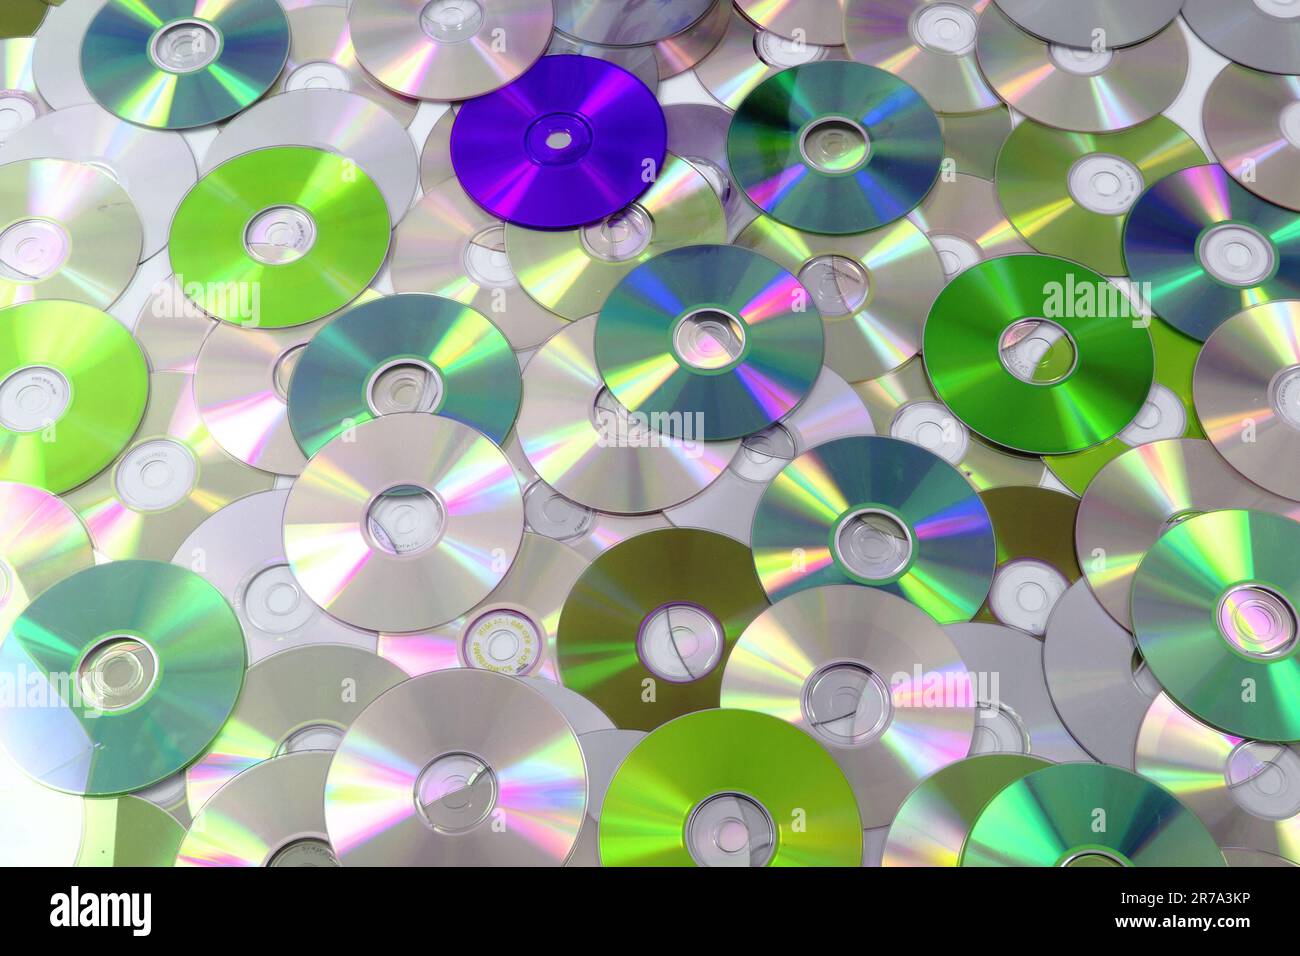 CD and DVD as nice technology background Stock Photo